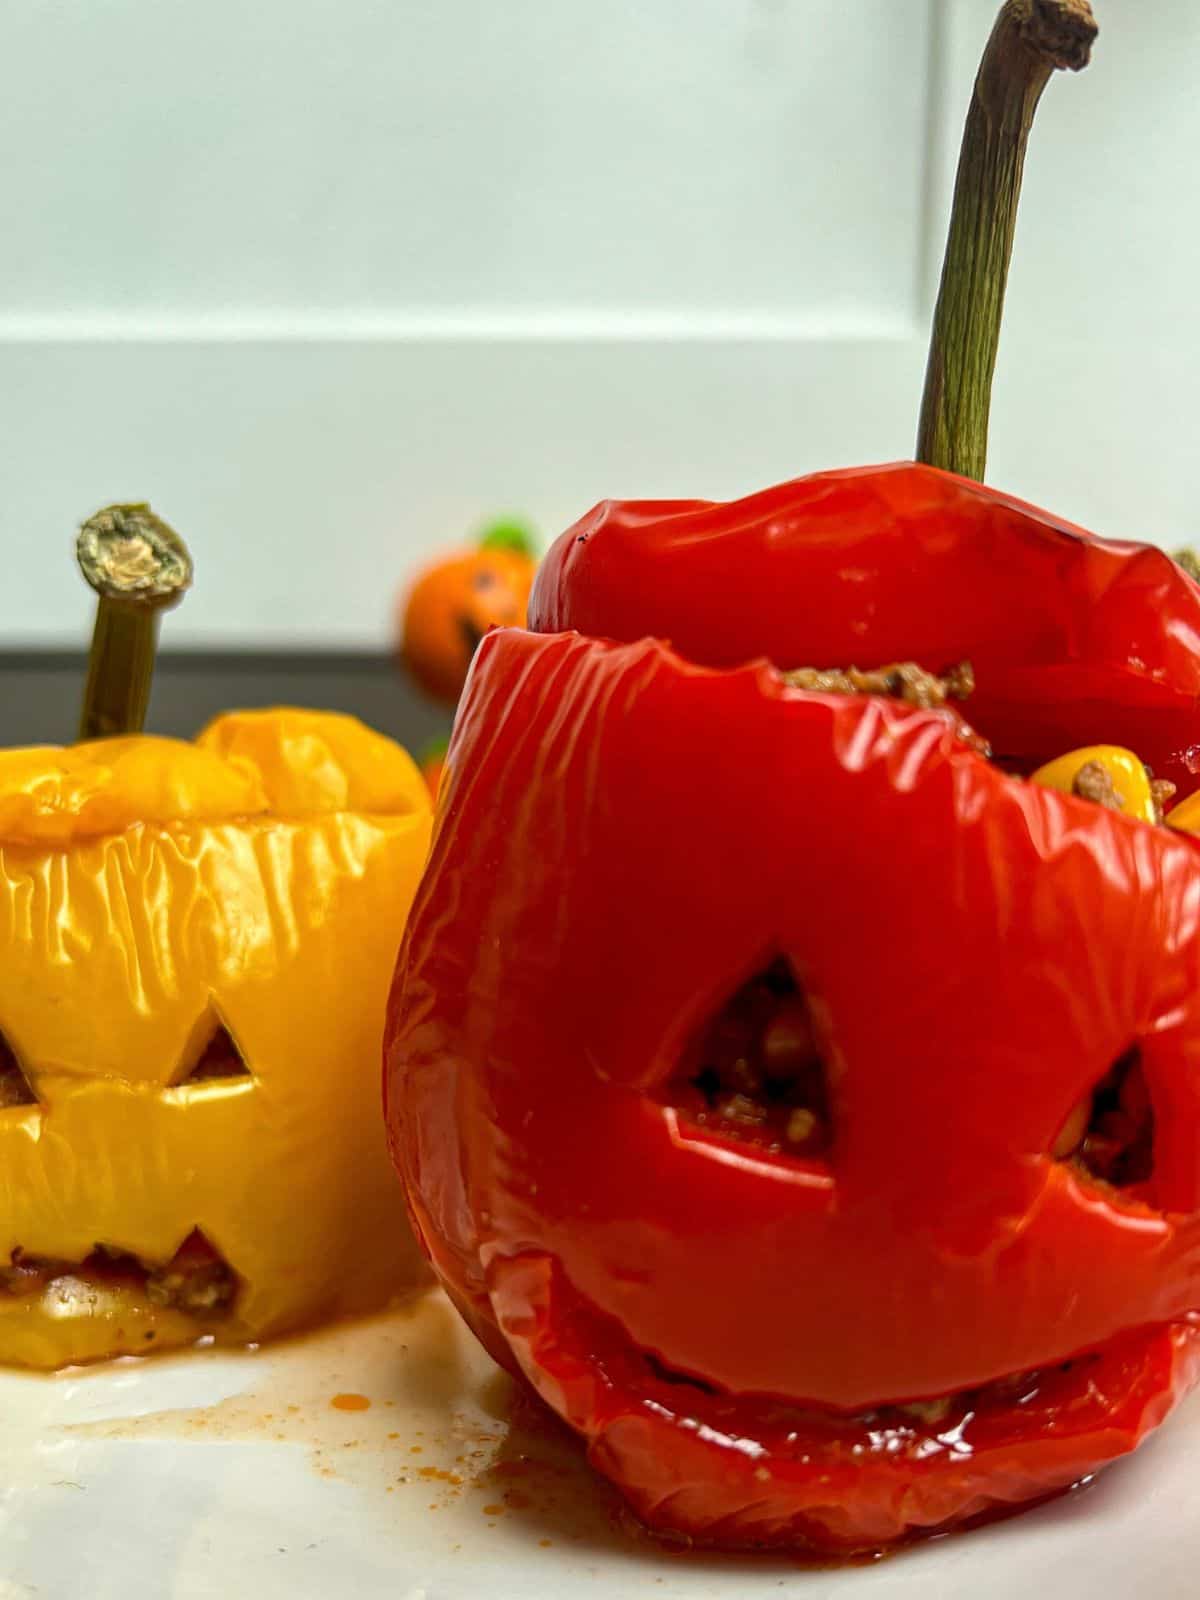 Red and yellow stuffed peppers with faces carved into them.